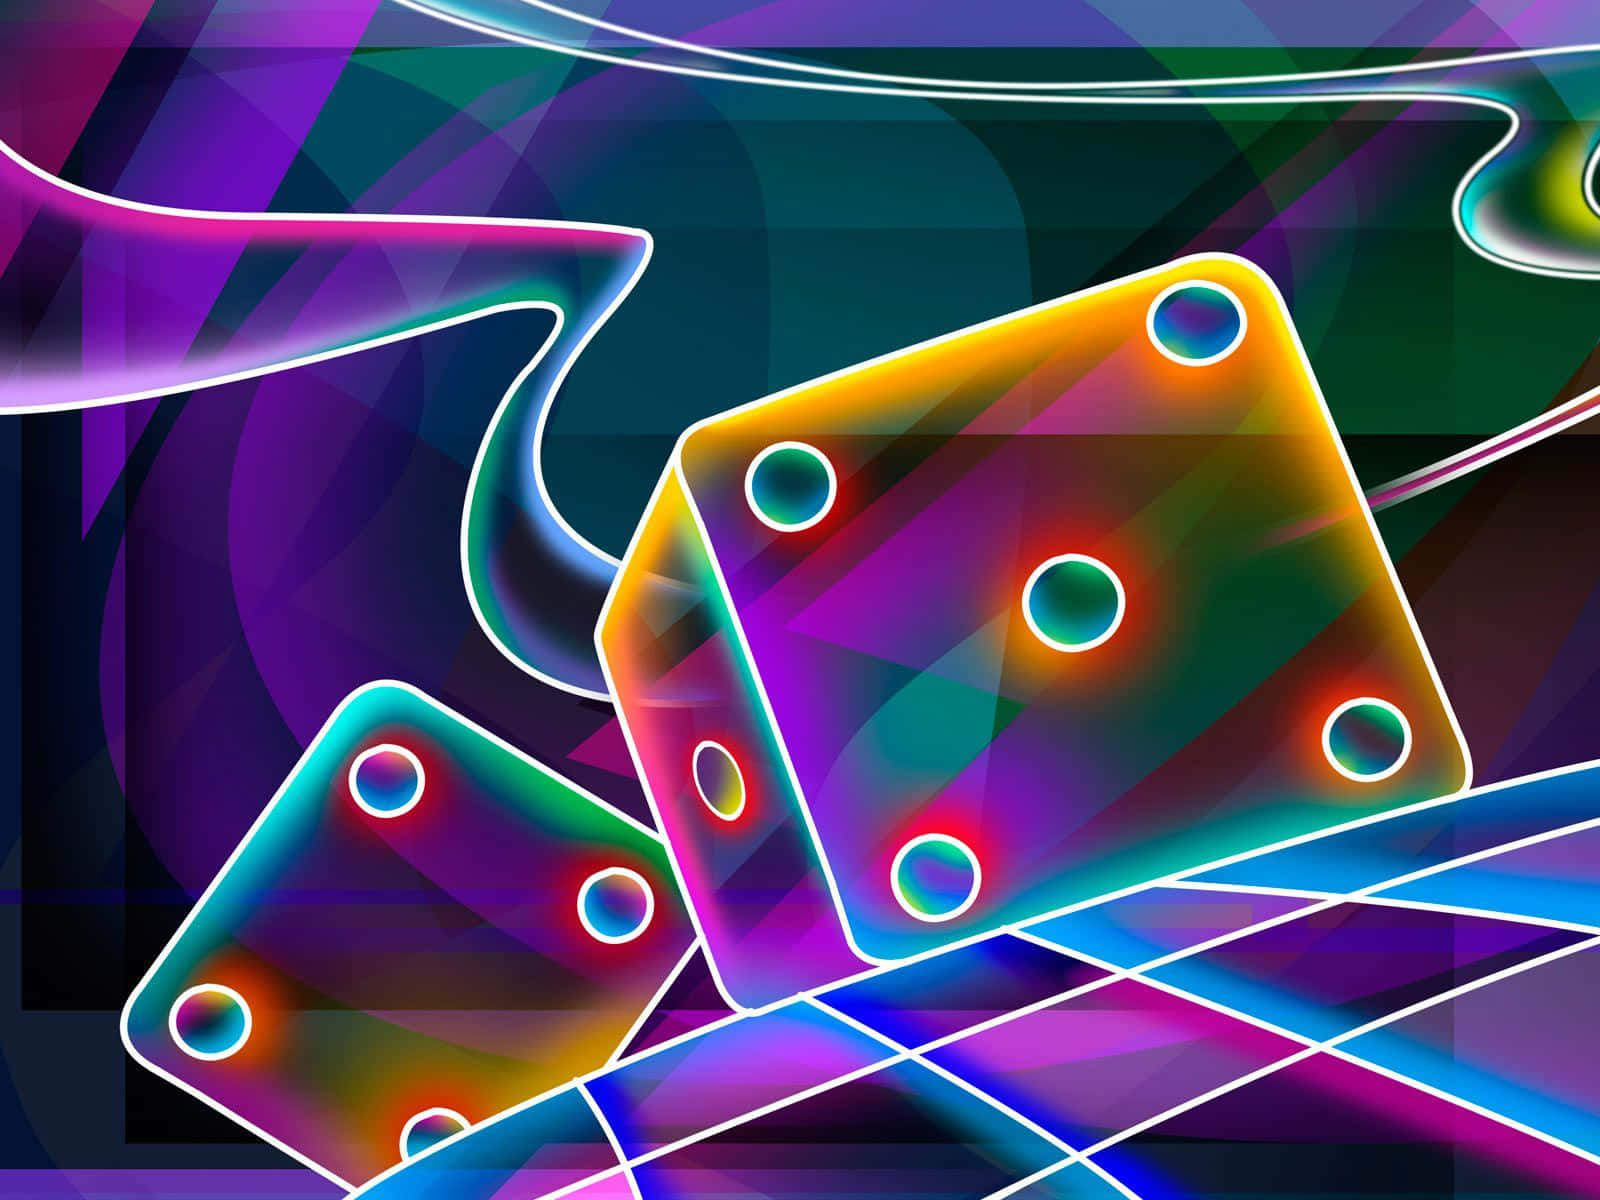 "A Bright Neon Glow in an Abstract Background" Wallpaper